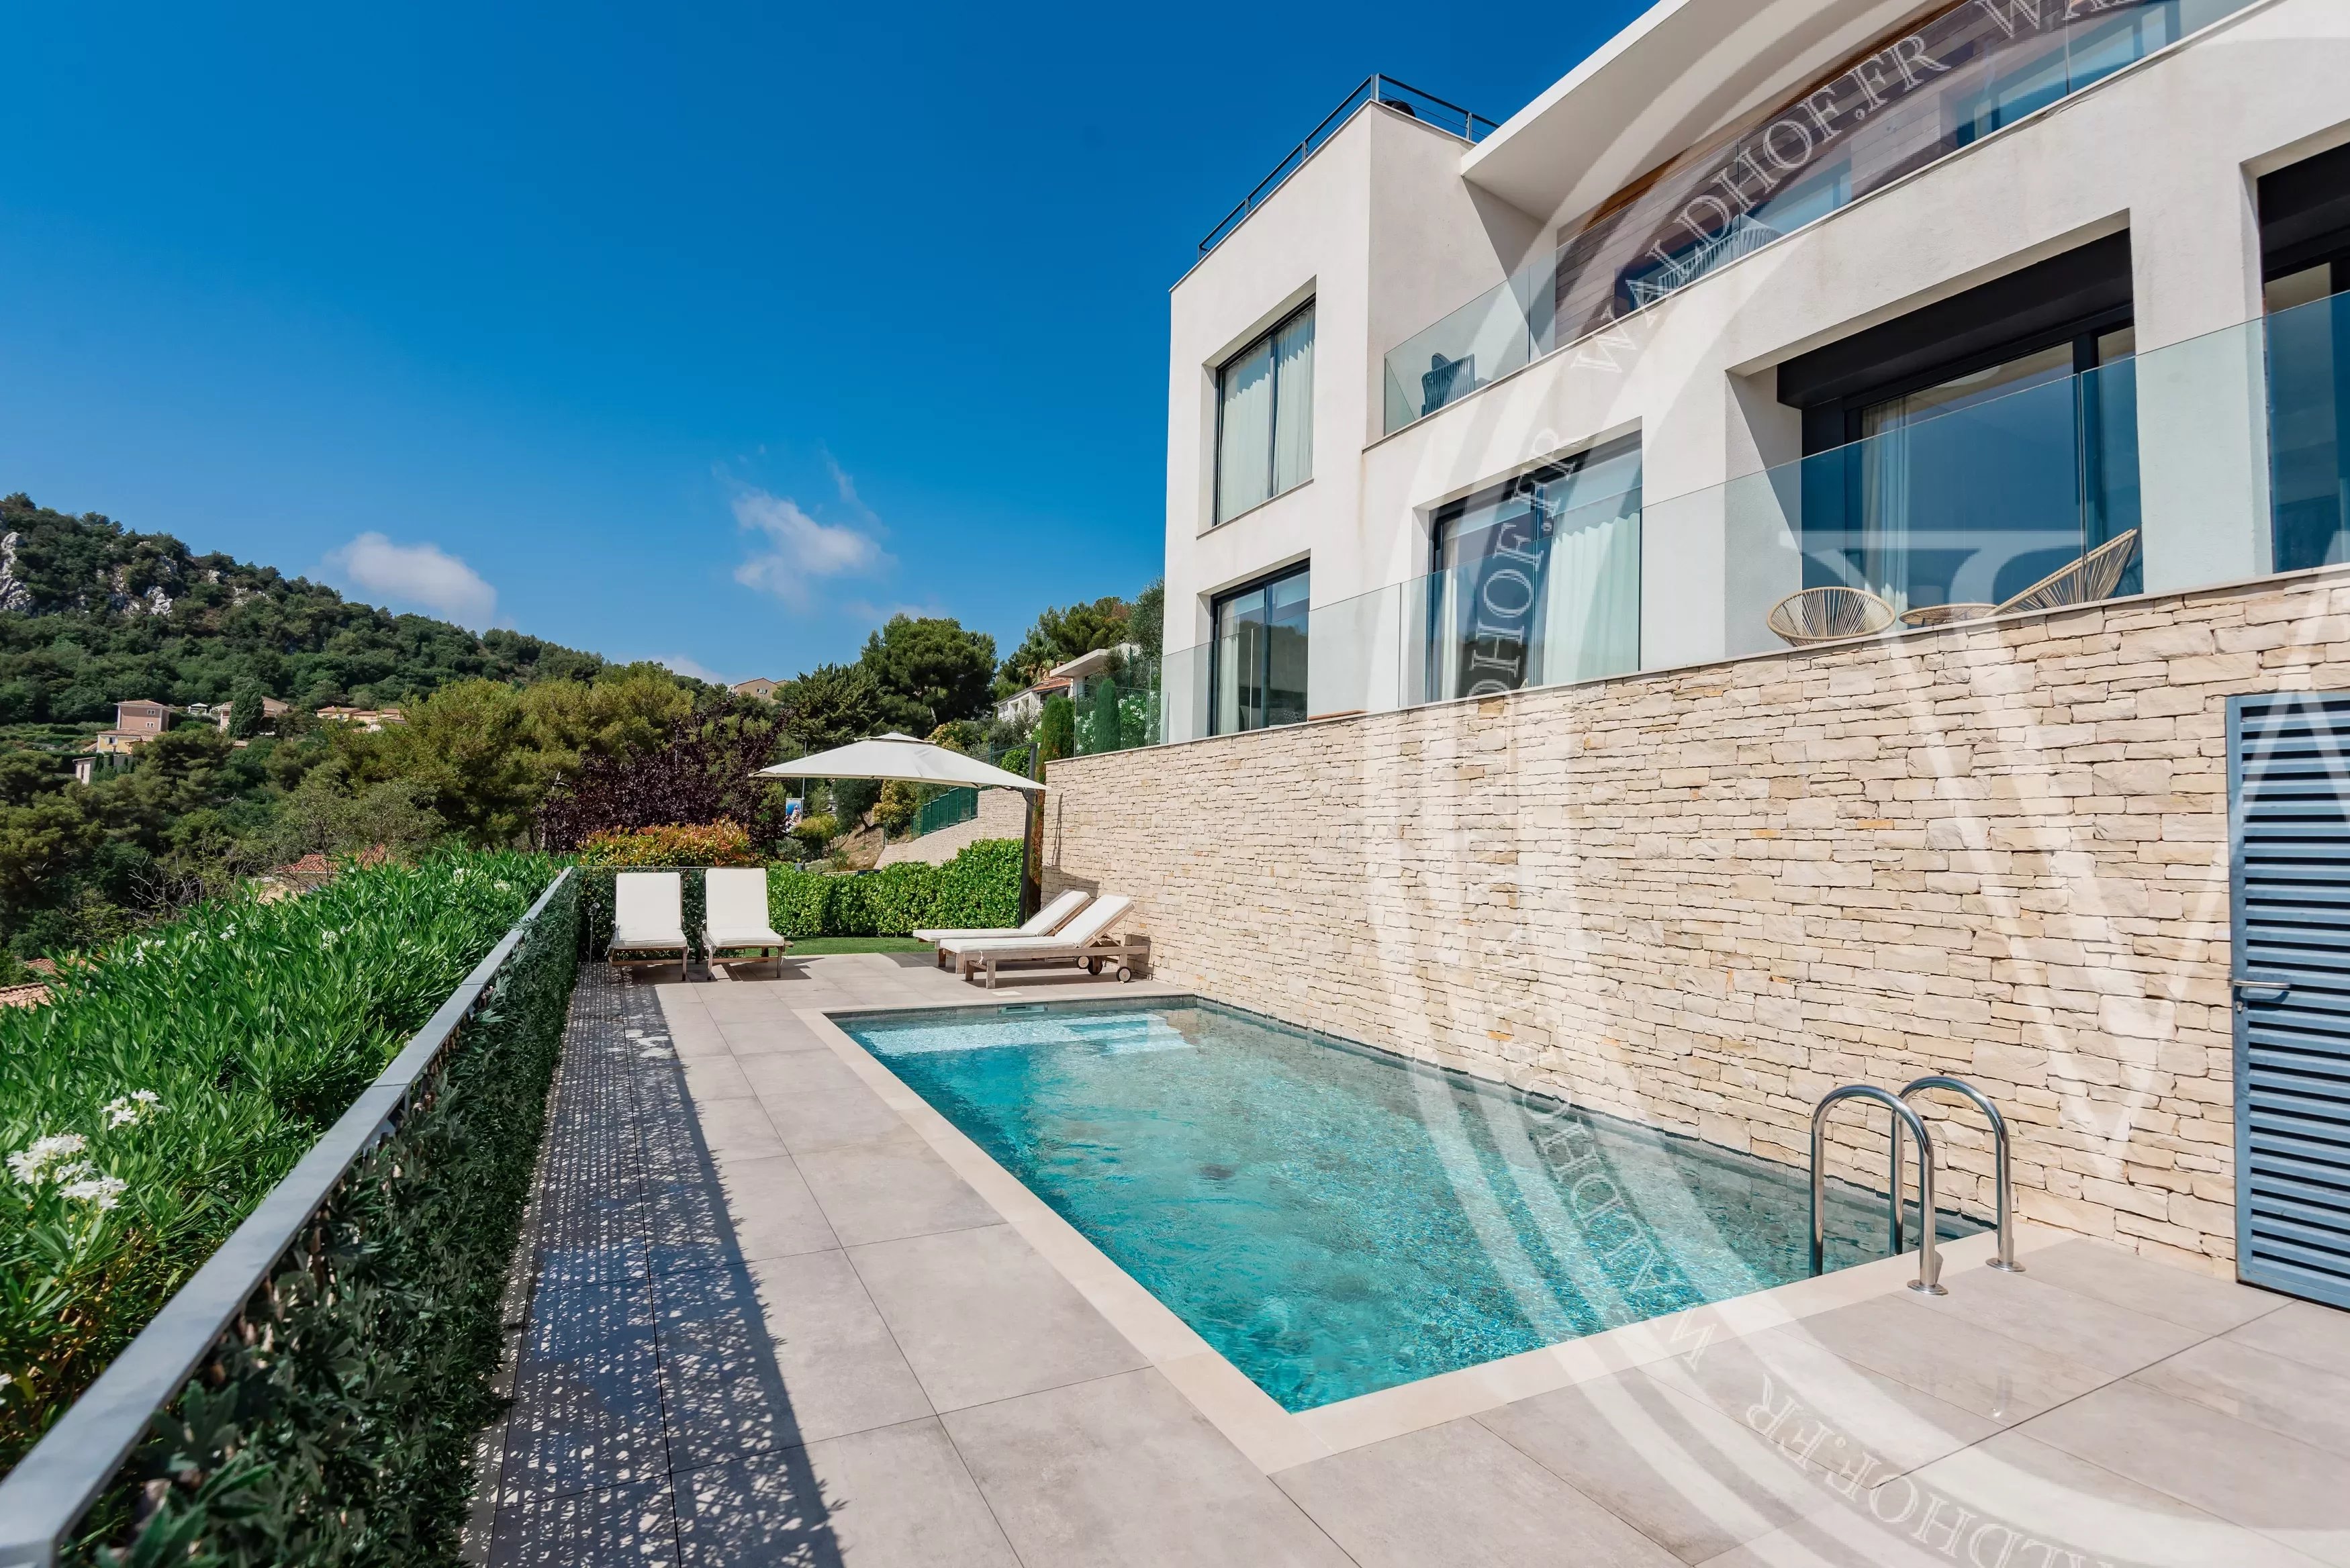 Turnkey family home in Eze village with sea view